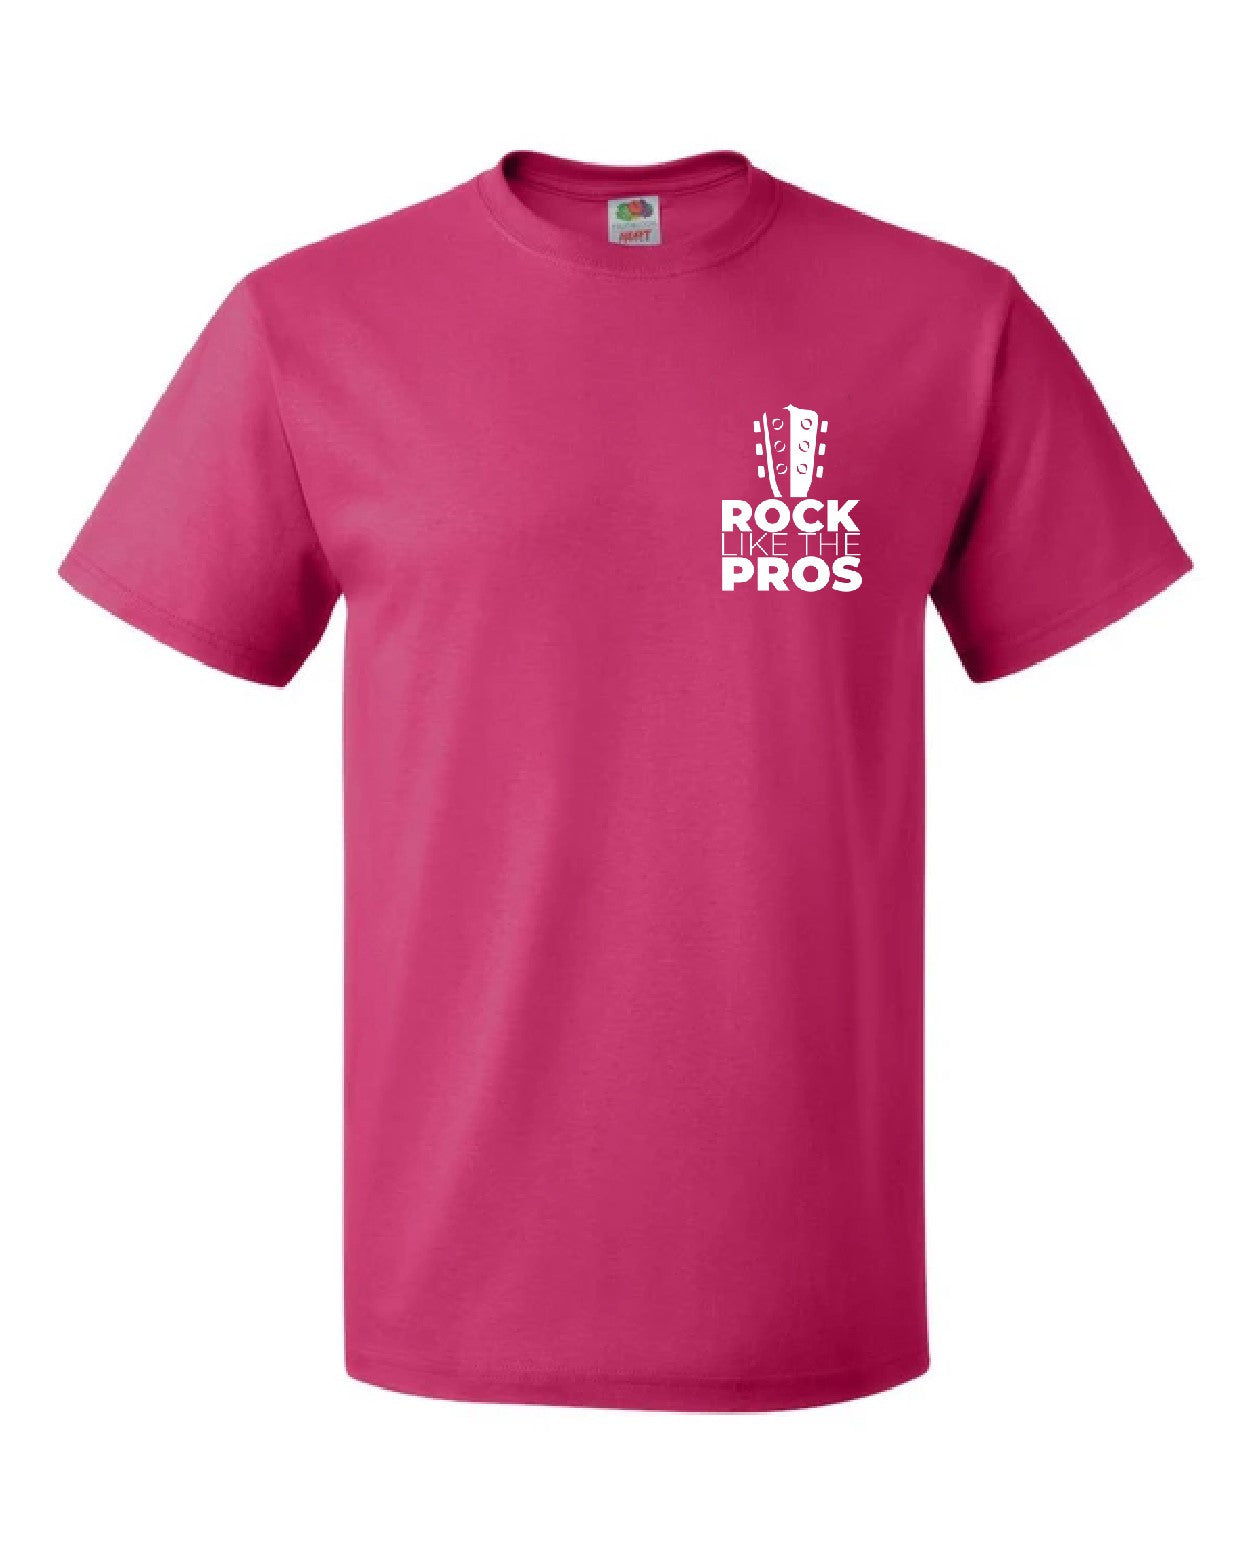 Rock Like The Pros T-Shirt